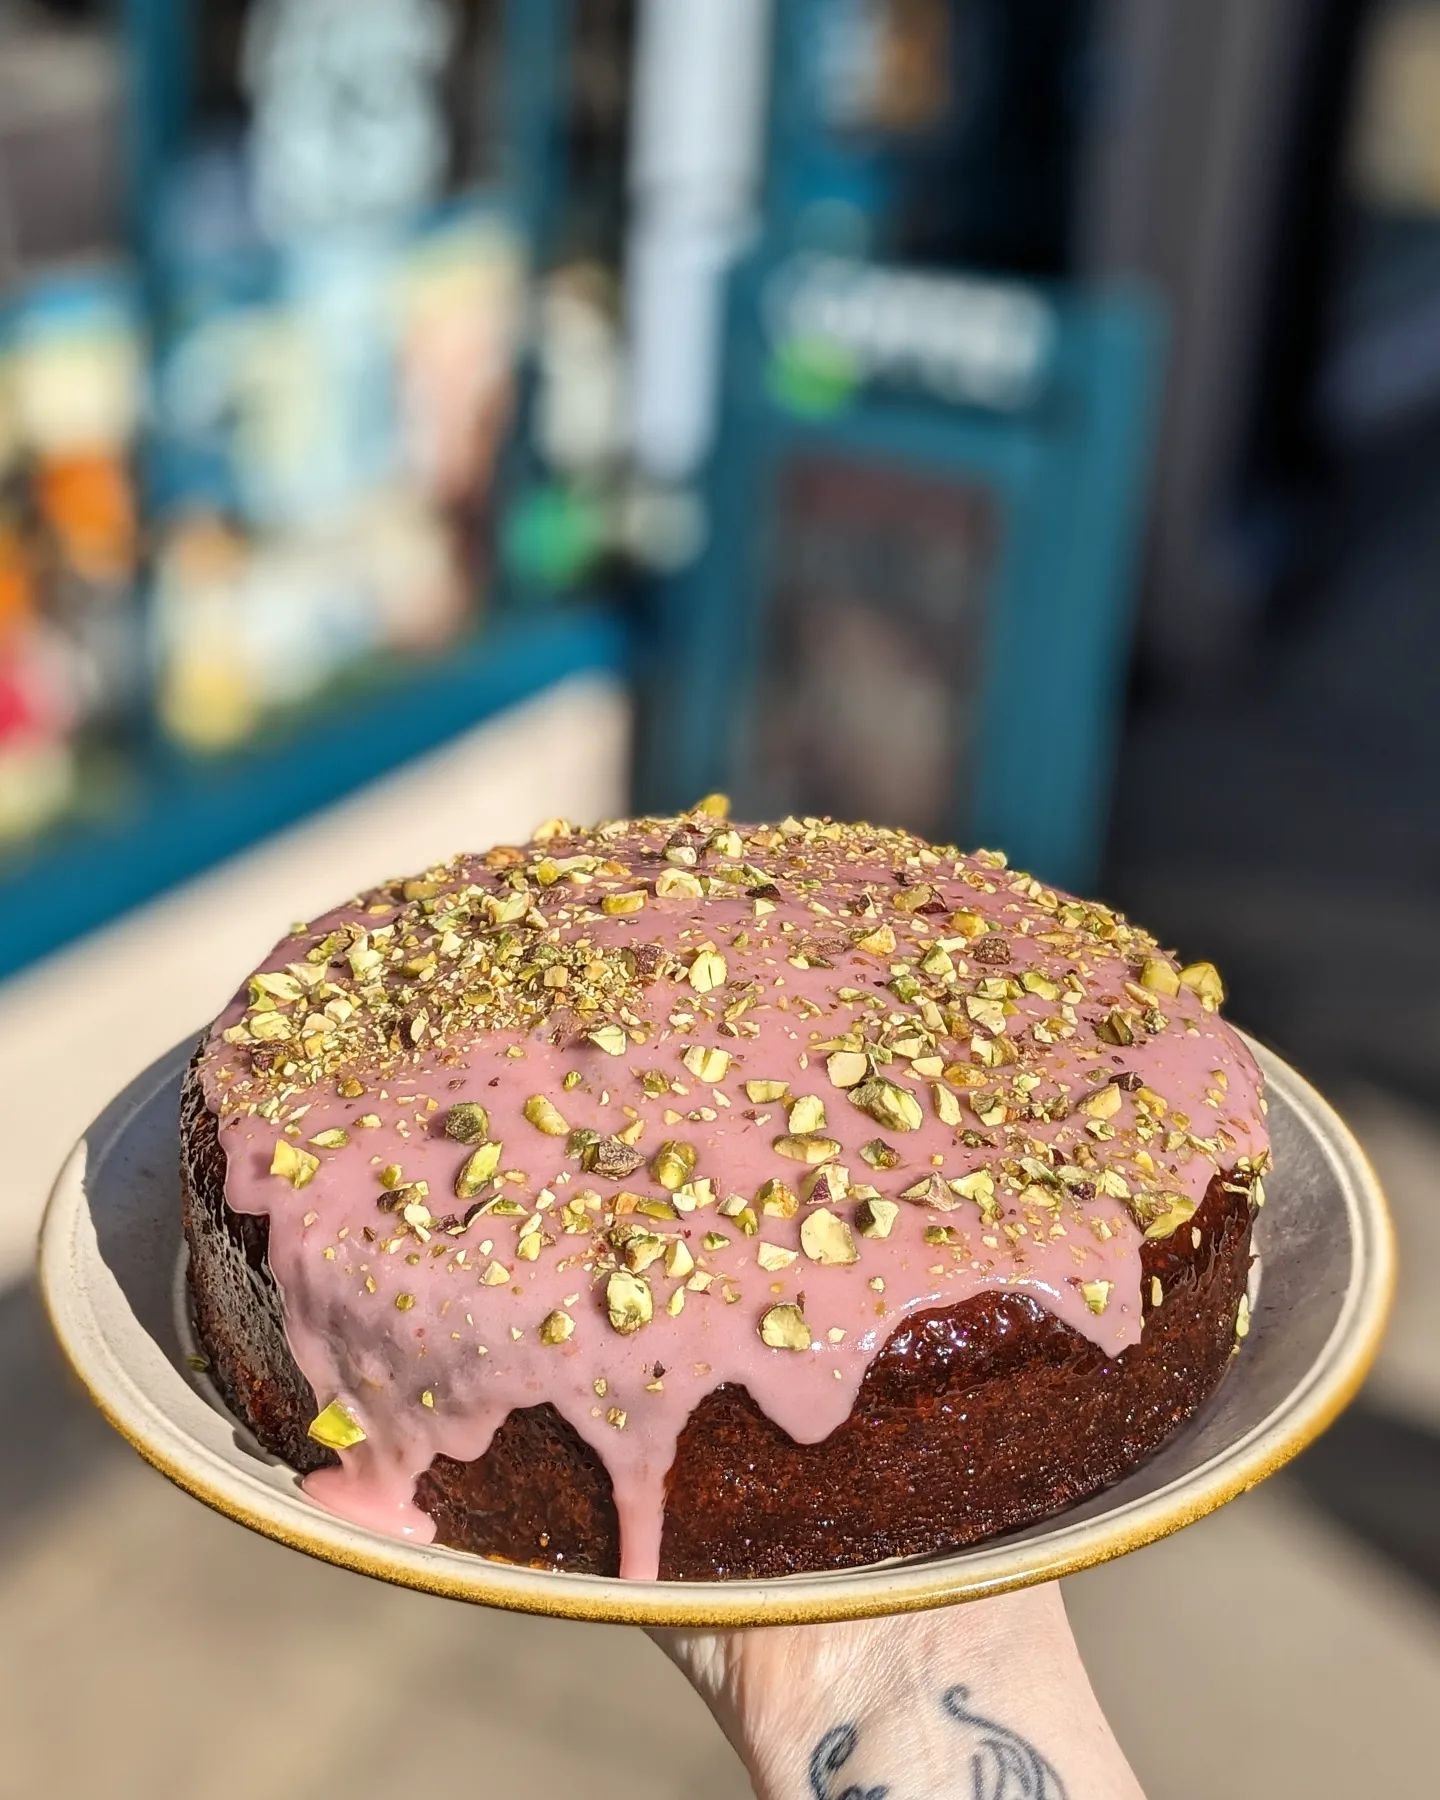 Pistachio &amp; Blood Orange Cake, courtesy of the @guardian Food Monthly magazine, is looking pretty in pink this morning!